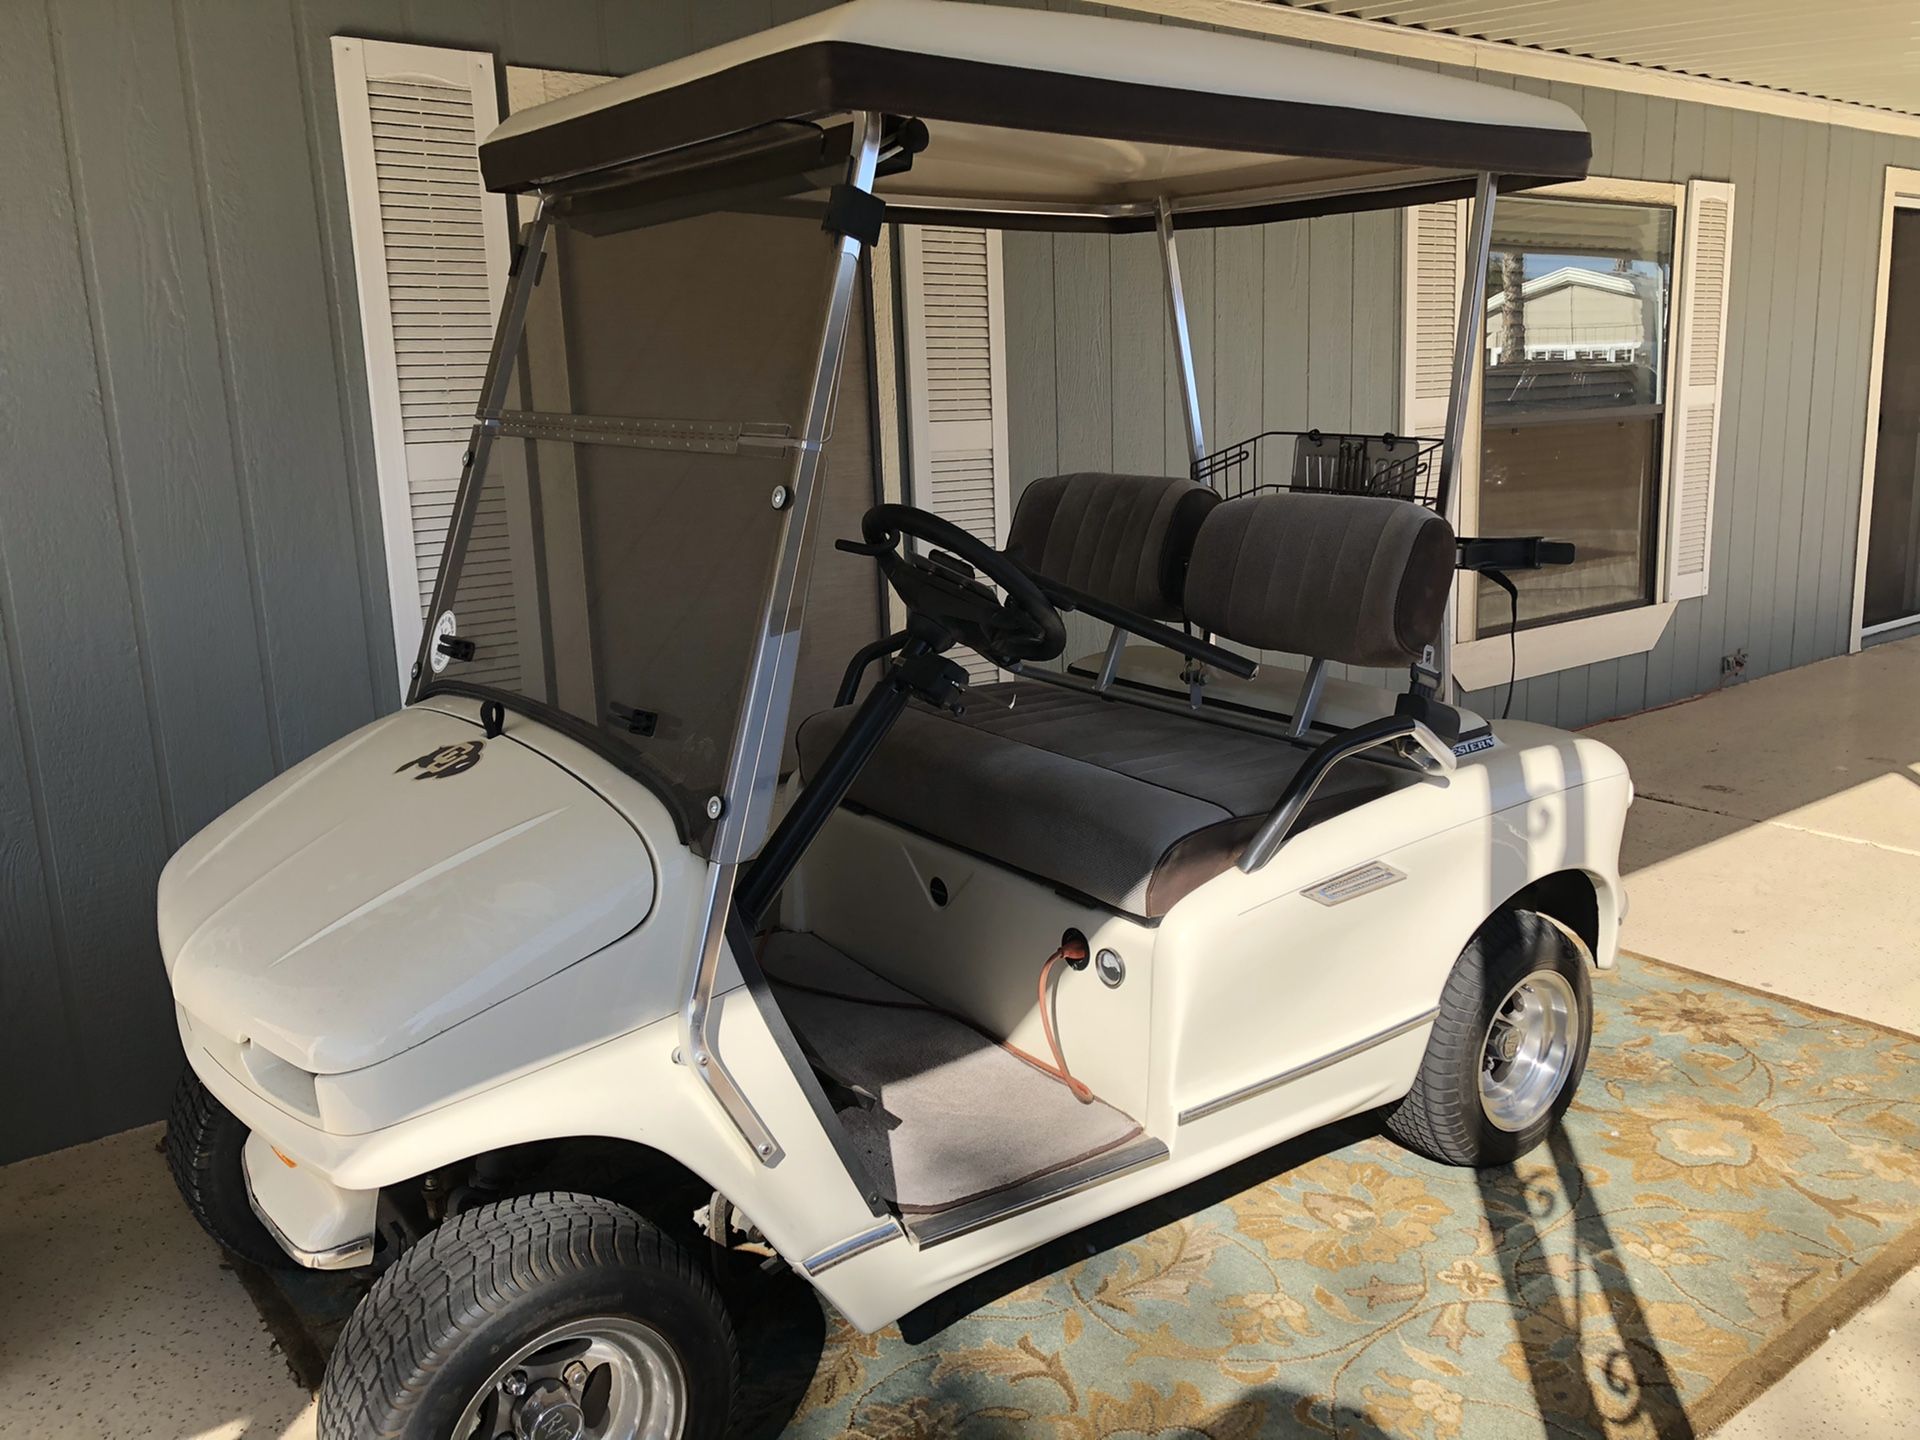 Golf cart. Western (EZGO). Built in transformer. Built in cooling area. Batteries and tires and wheels are only three years old. Seat cover redone.